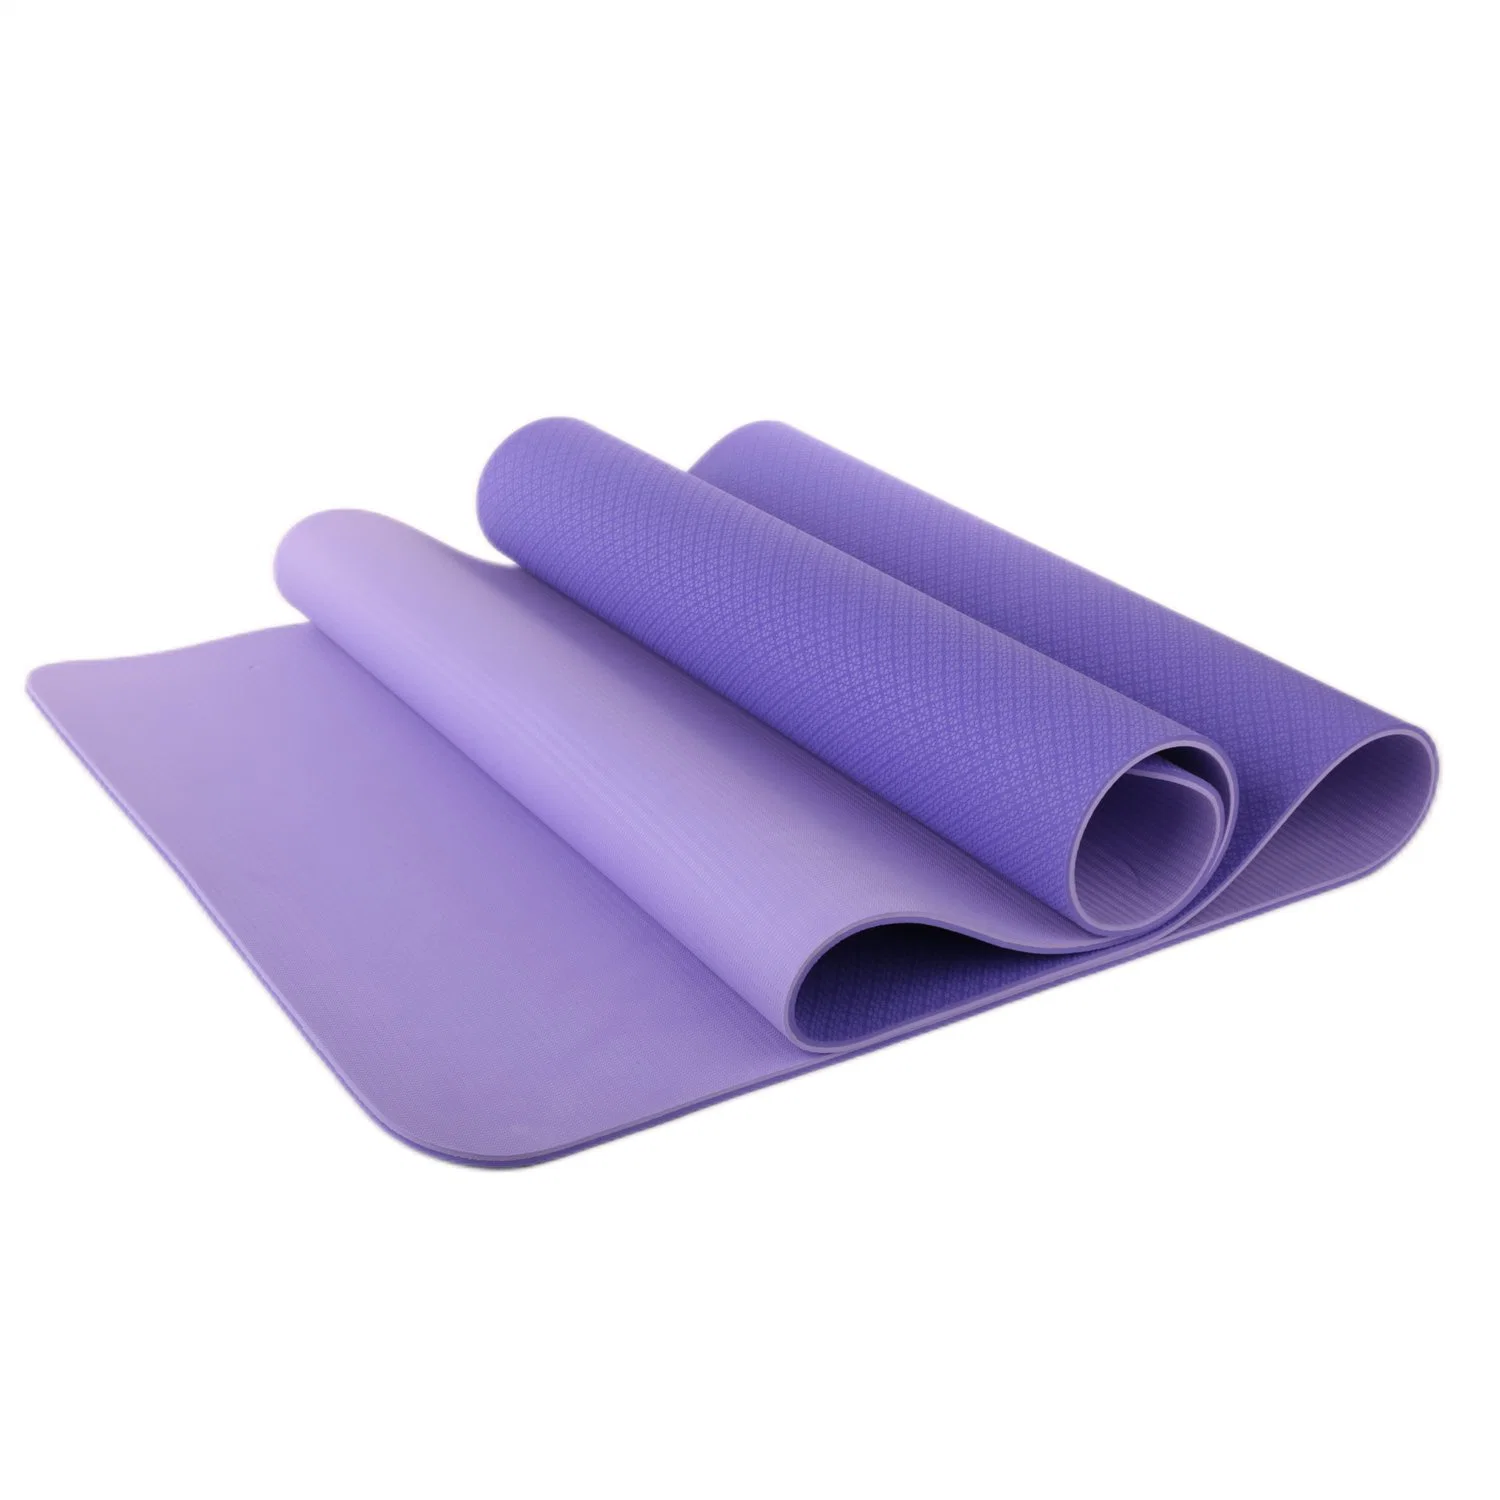 Hot Selling 173X61cm Double Layer Eco Friendly Yoga Gym Fitness 6mm TPE Yoga Mat for Women